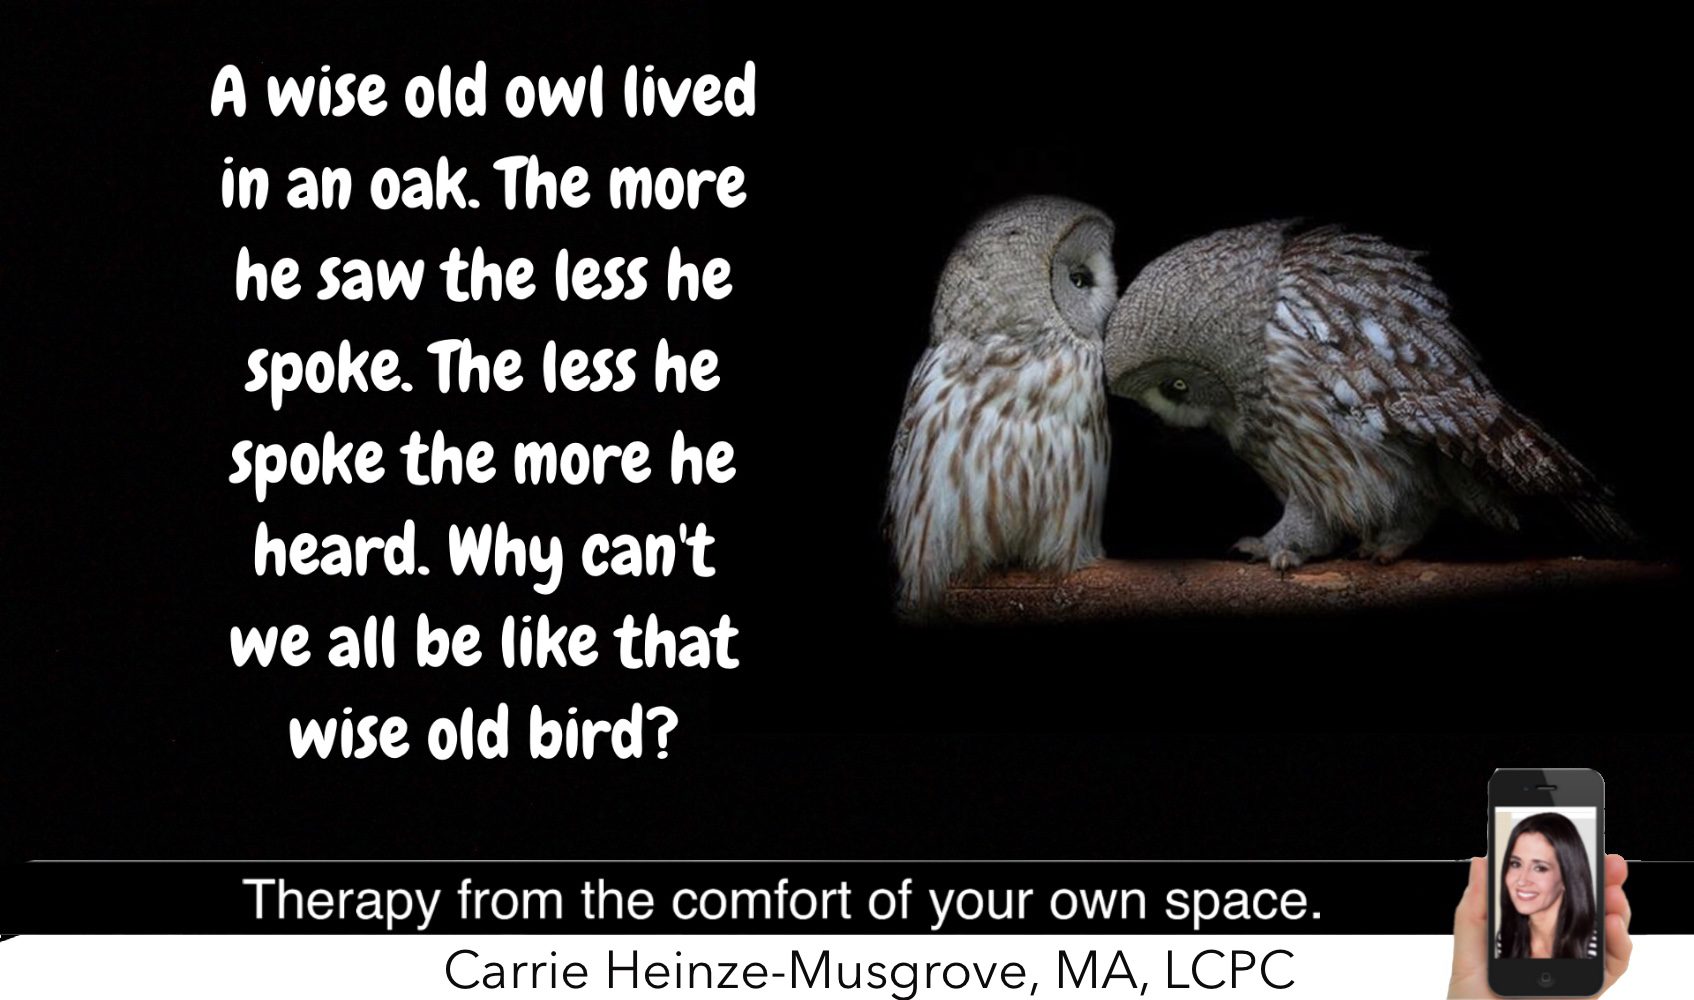 The wise old owl.